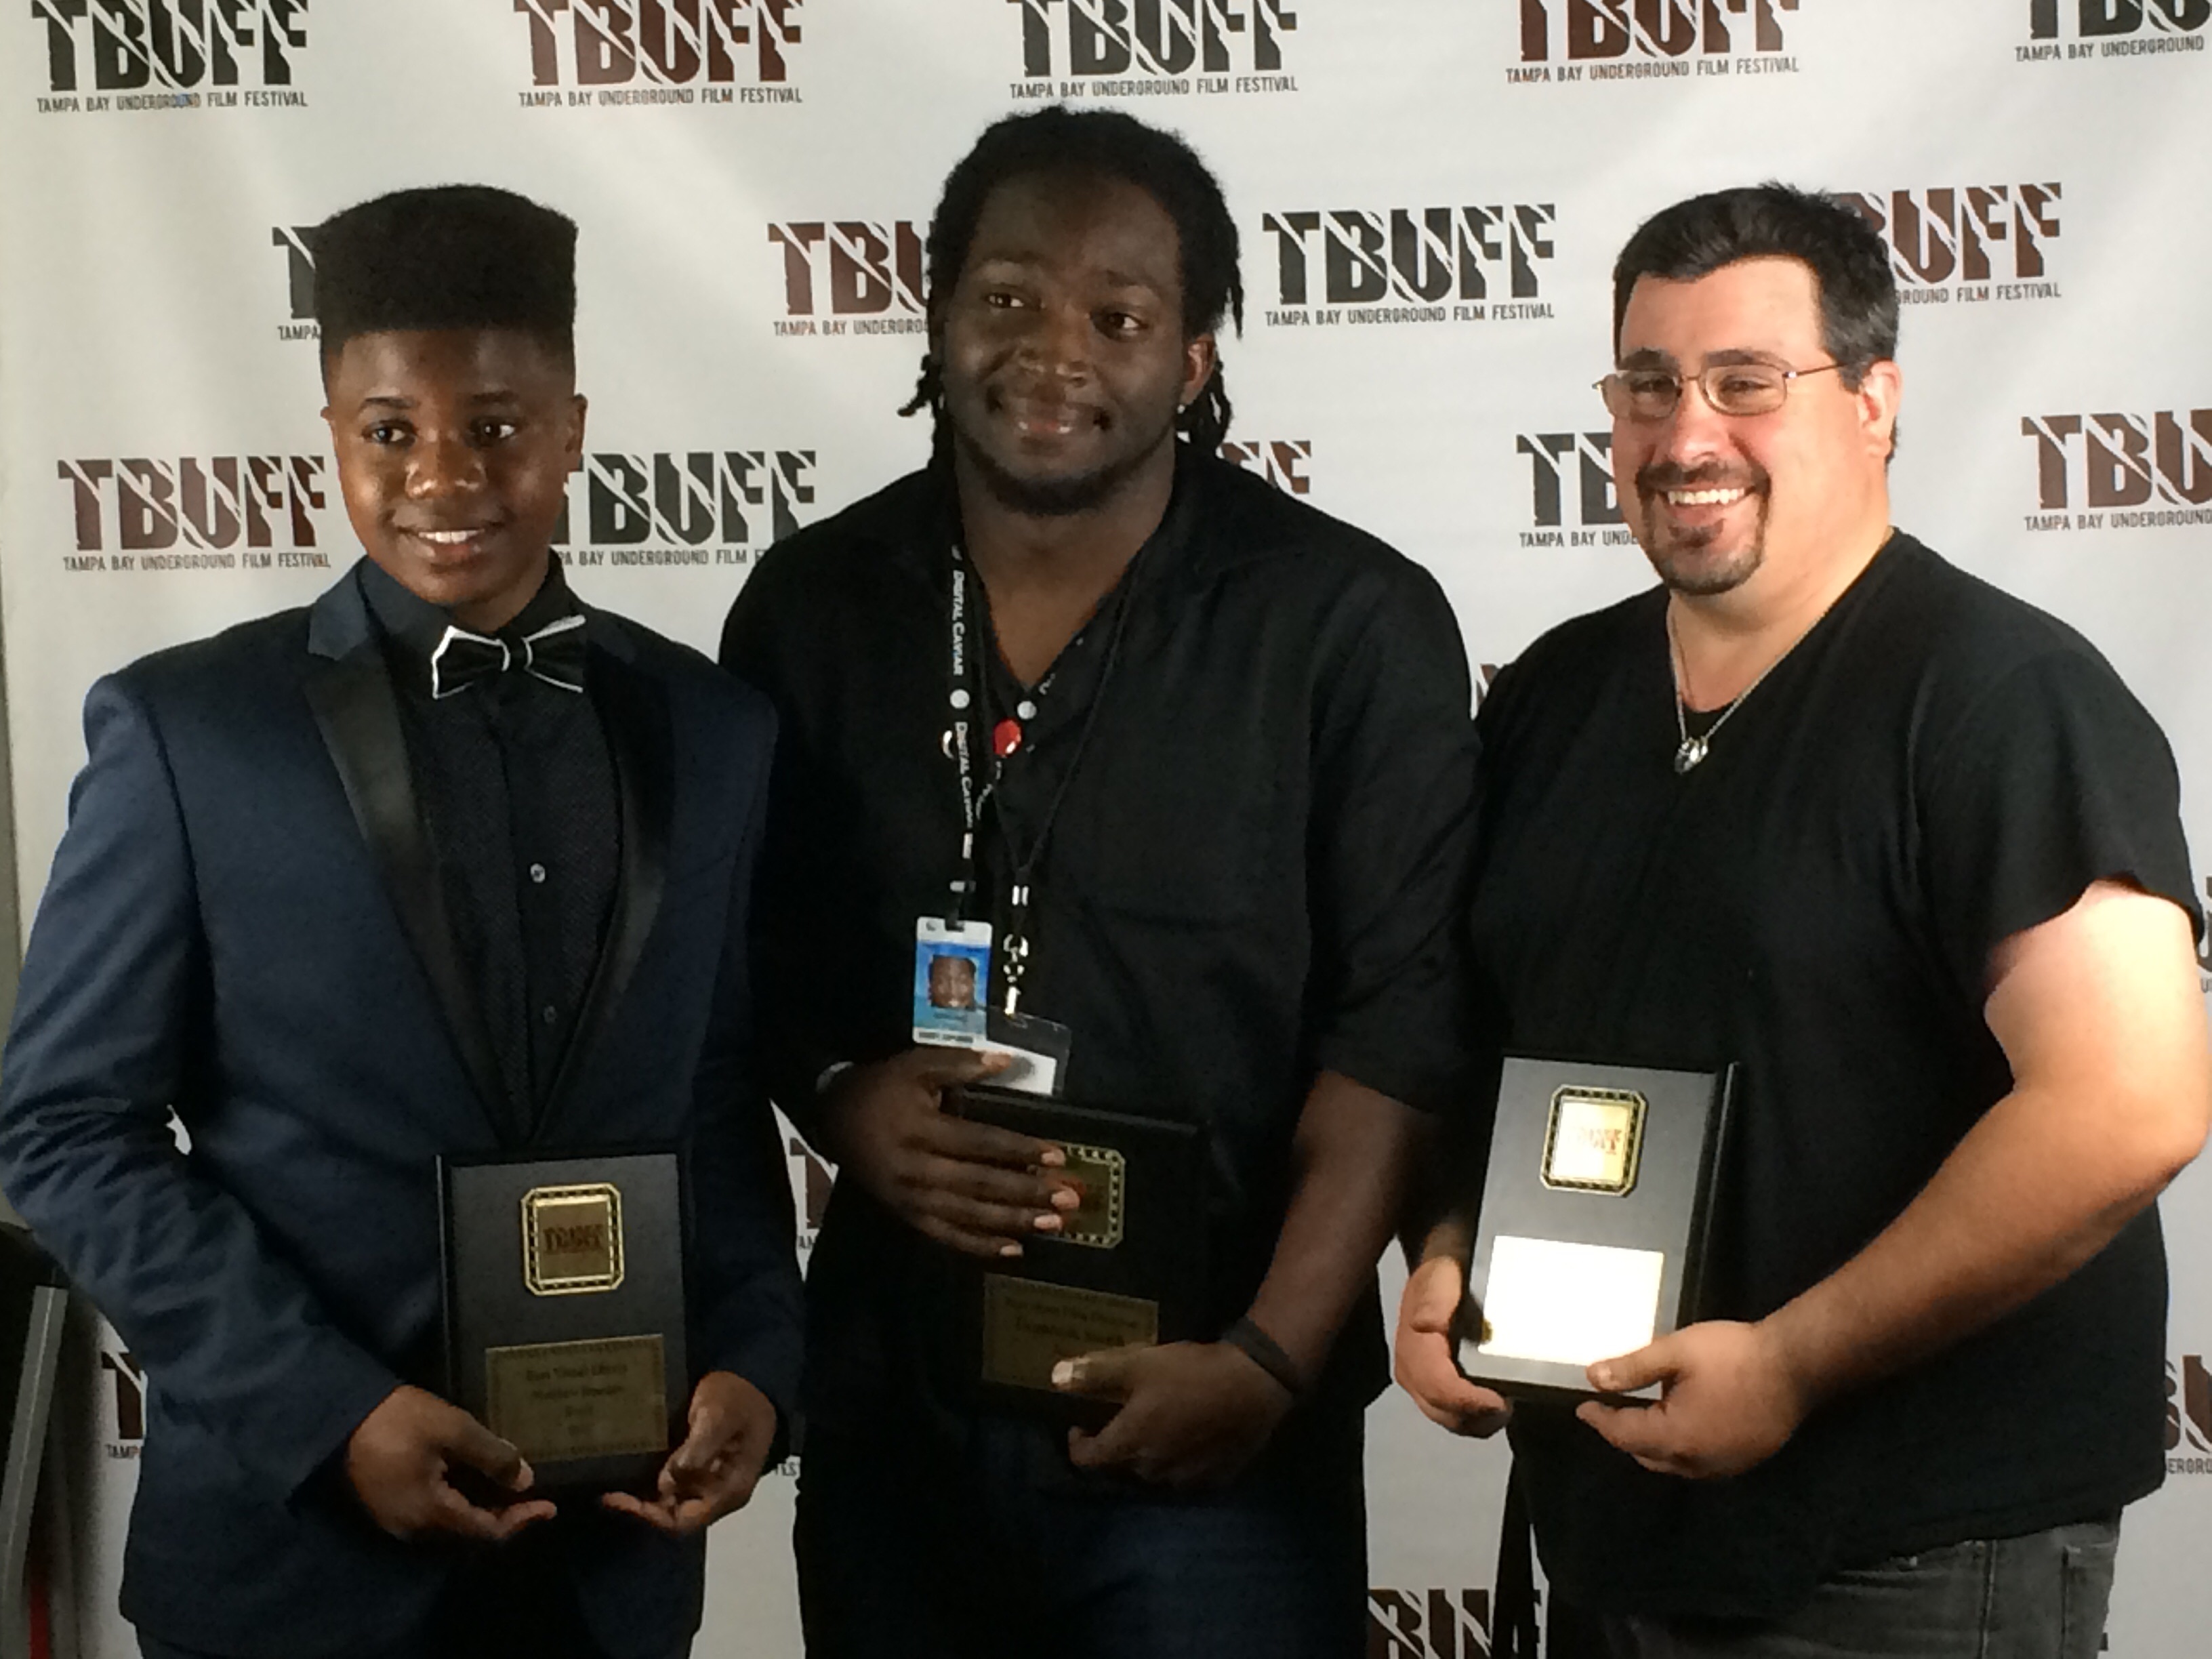 The Director, Domonic Smith, Cinematographer, Scott Sullivan, and yours truly at the TBUFF awards show. RESET won 4 awards. Best Visual Effects, Best Short Director, Best Florida Short Film, and Audience Choice Short Film!!